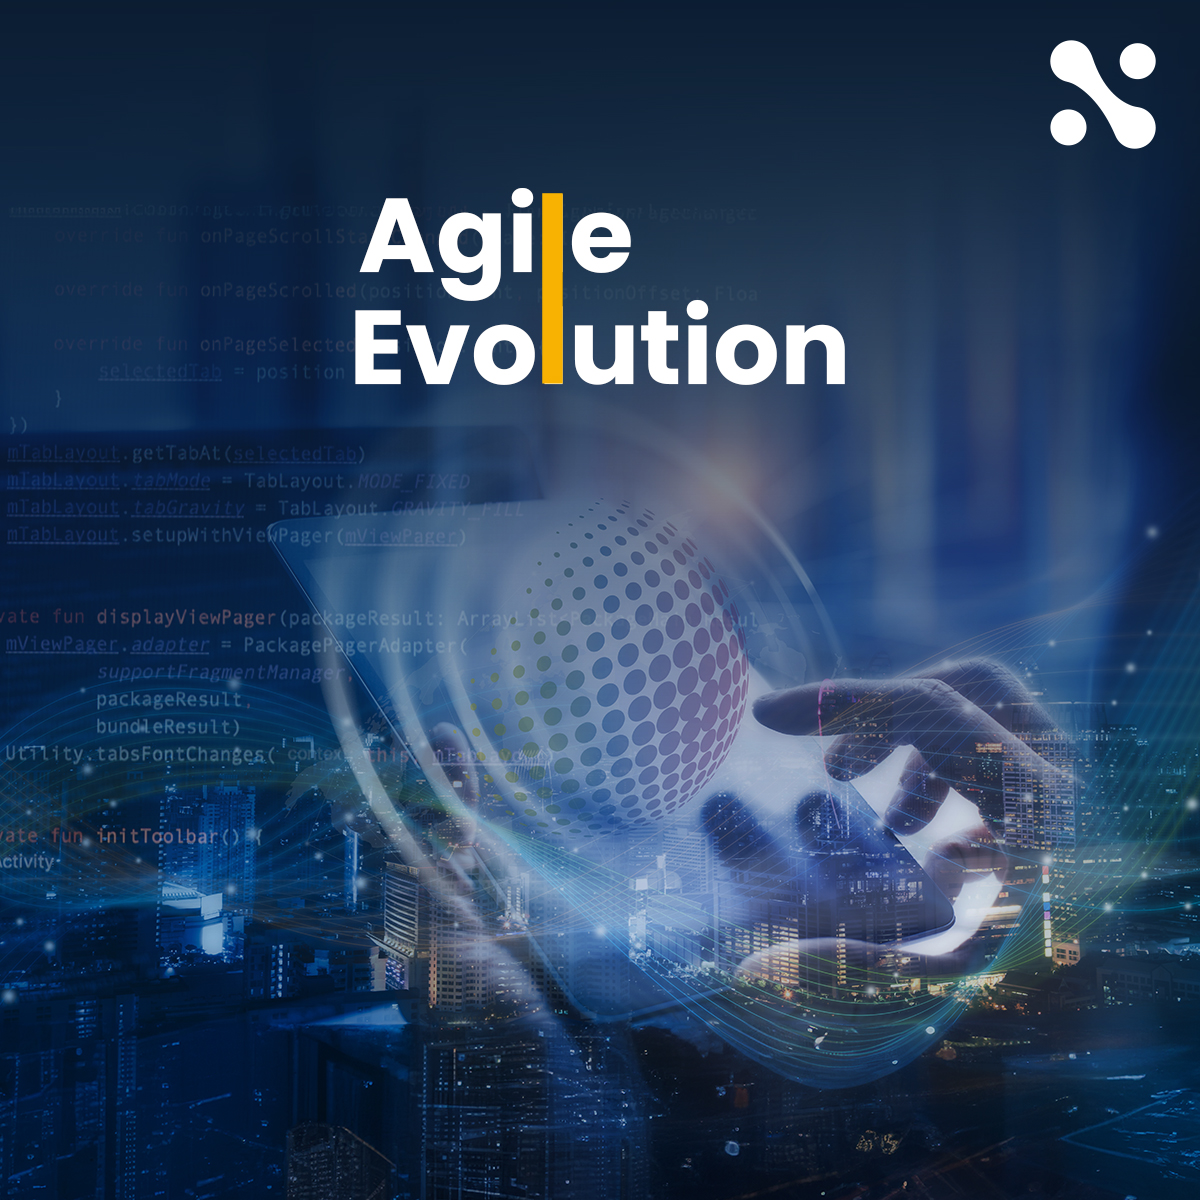 Navigate the ever-changing tech landscape with the agility your projects deserve. Agile development is about creating value faster & adapting seamlessly. 

Let's make your development cycle as dynamic as the solutions you build.

#AgileDevelopment #TechInnovation #Neuronimbus